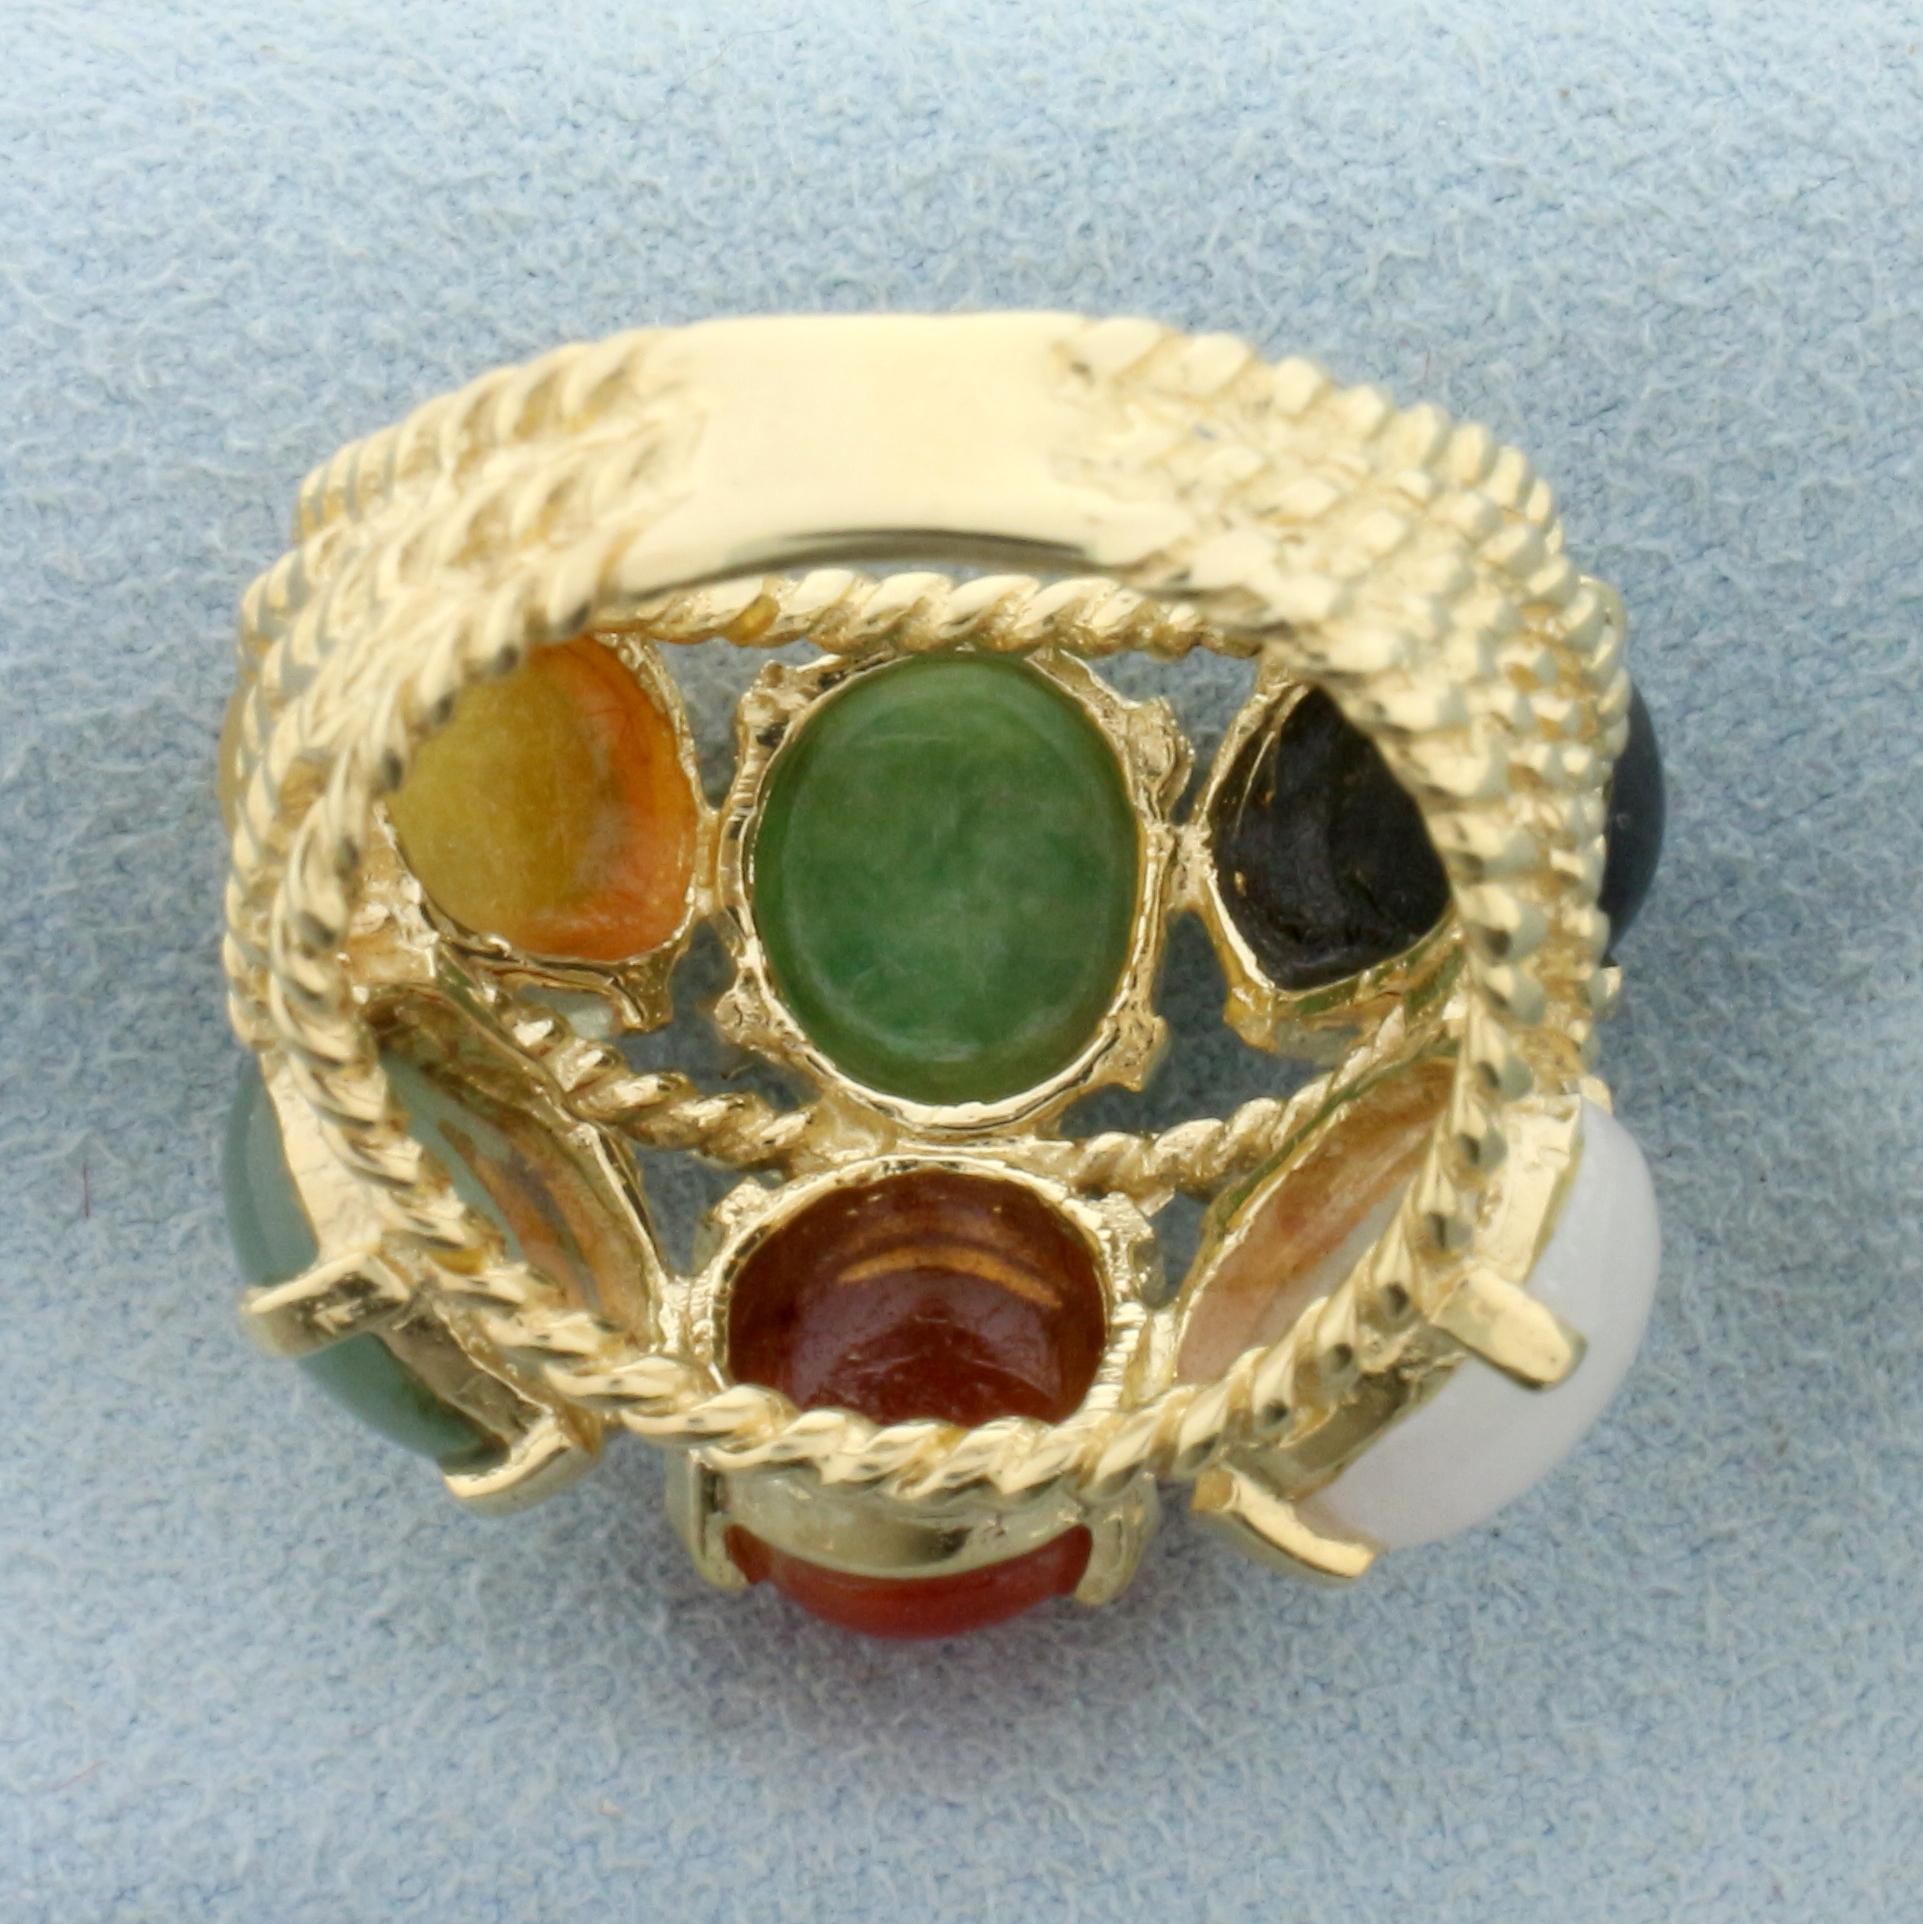 Jade Multi Color Statement Ring In 14k Yellow Gold